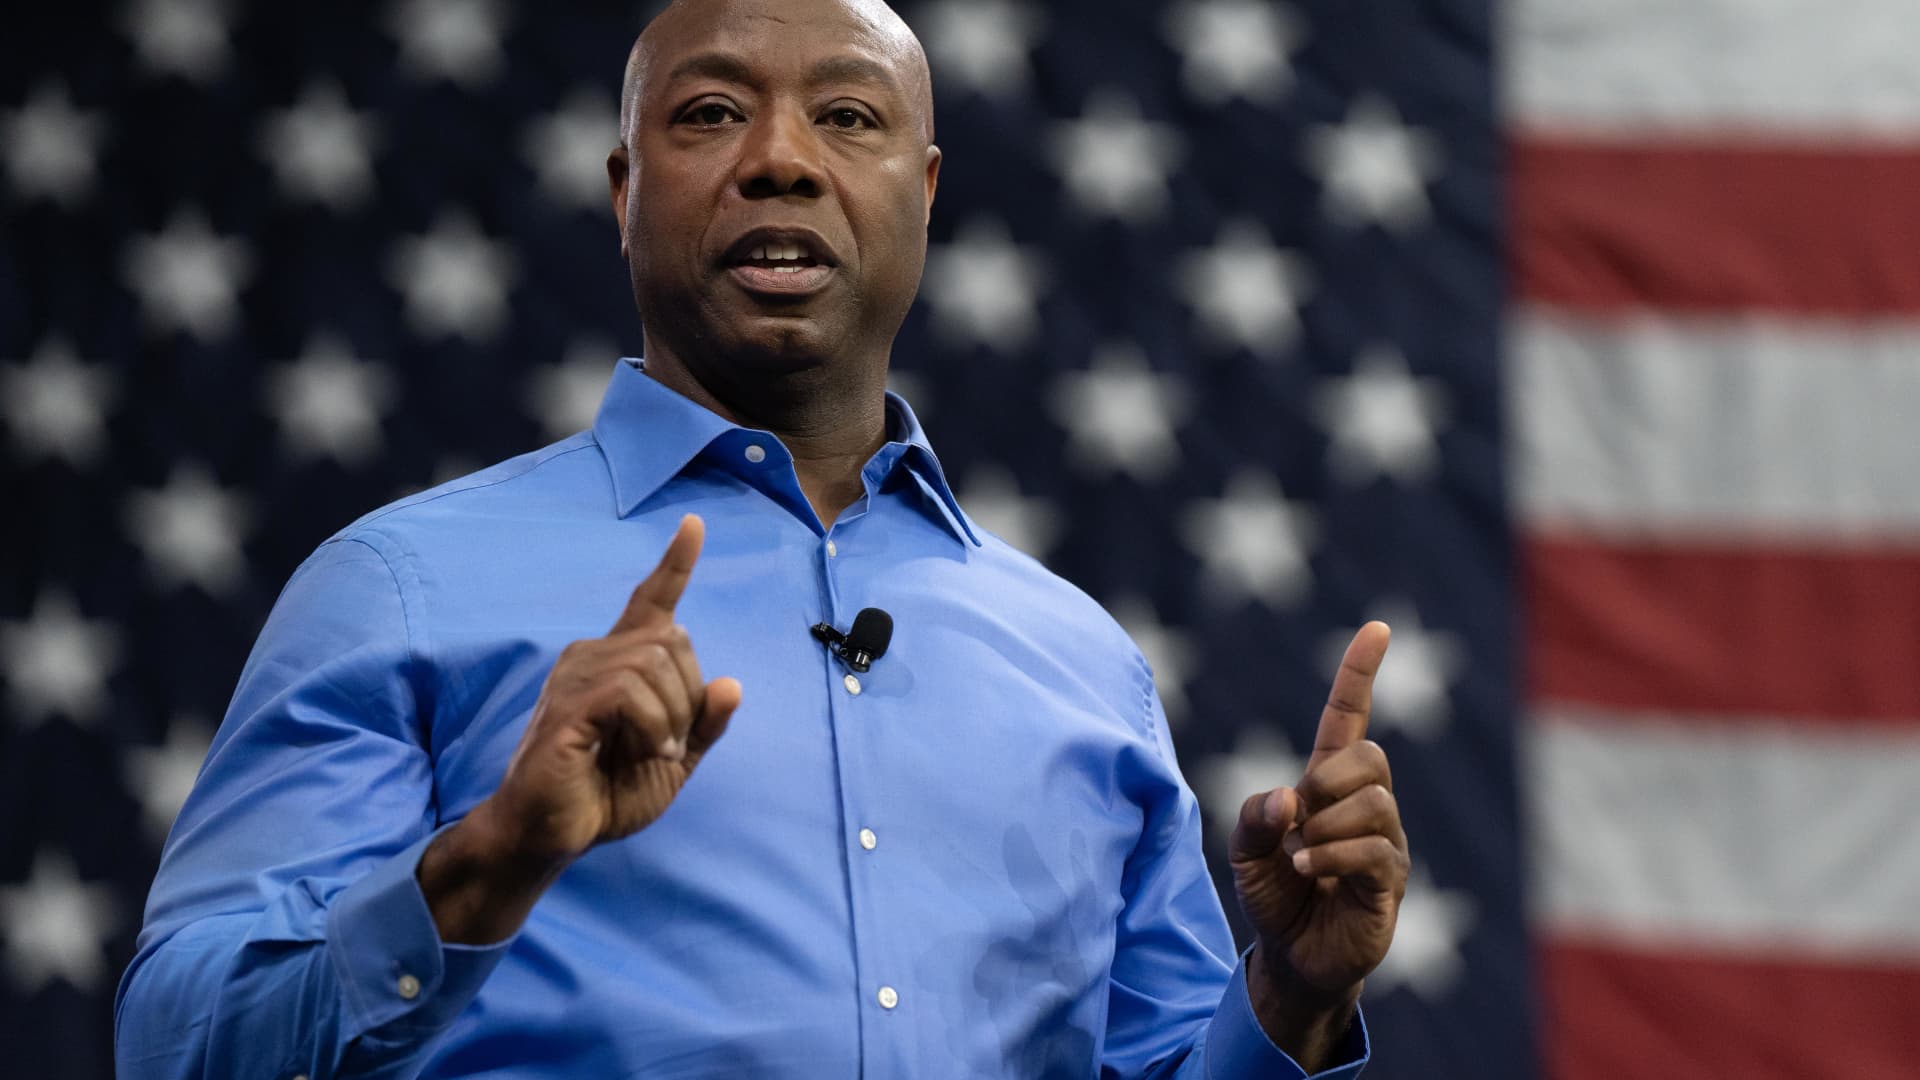 Senator Tim Scott is pushing for a bill that would require disclosure of apps’ country of origin